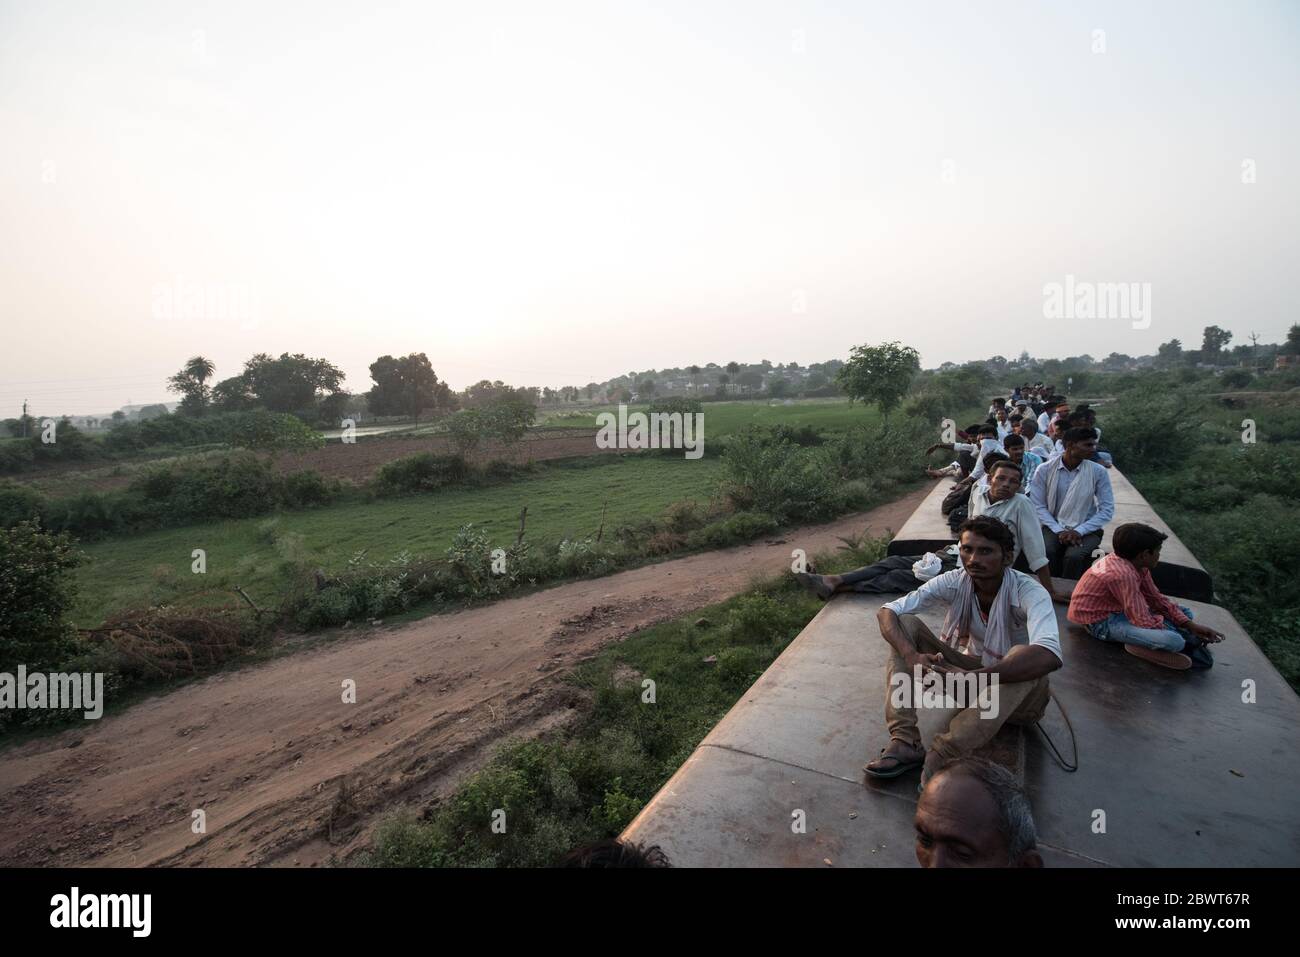 Men on top of overcrowded train passing through countryside in Madhya Pradesh, India. Indian Railways. Stock Photo